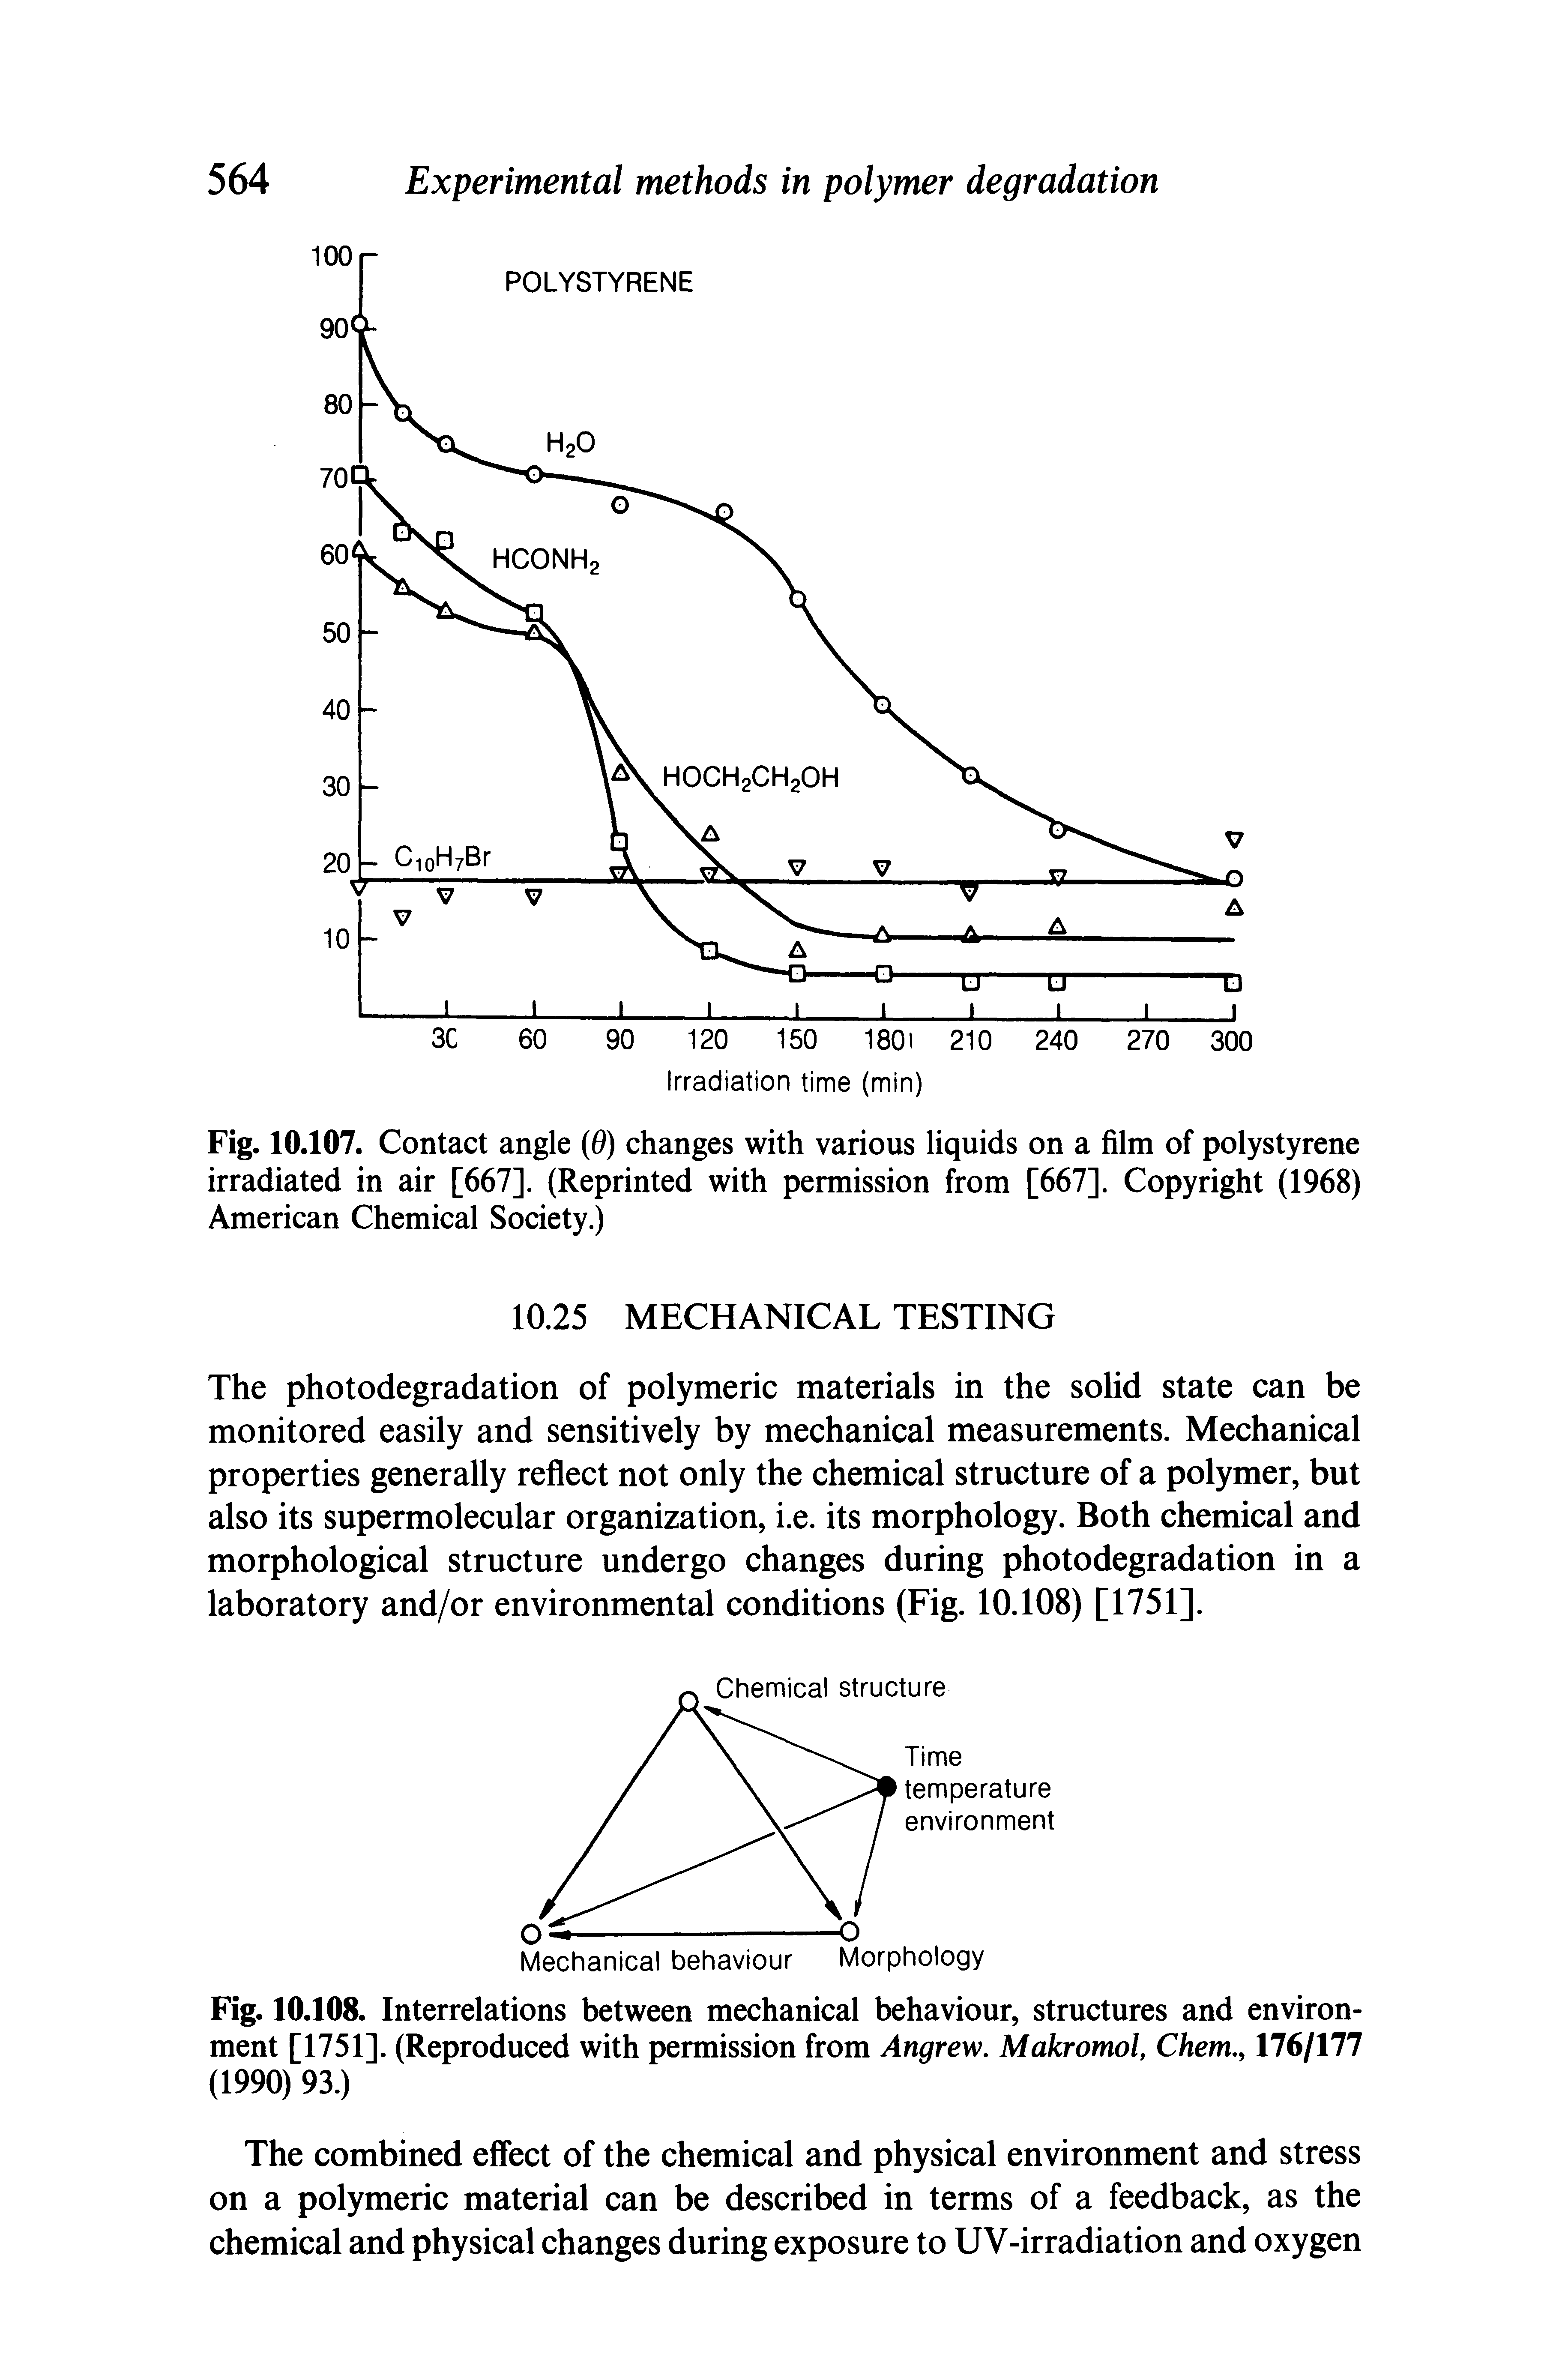 Fig. 10.107. Contact angle 6) changes with various liquids on a film of polystyrene irradiated in air [667]. (Reprinted with permission from [667]. Copyright (1968) American Chemical Society.)...